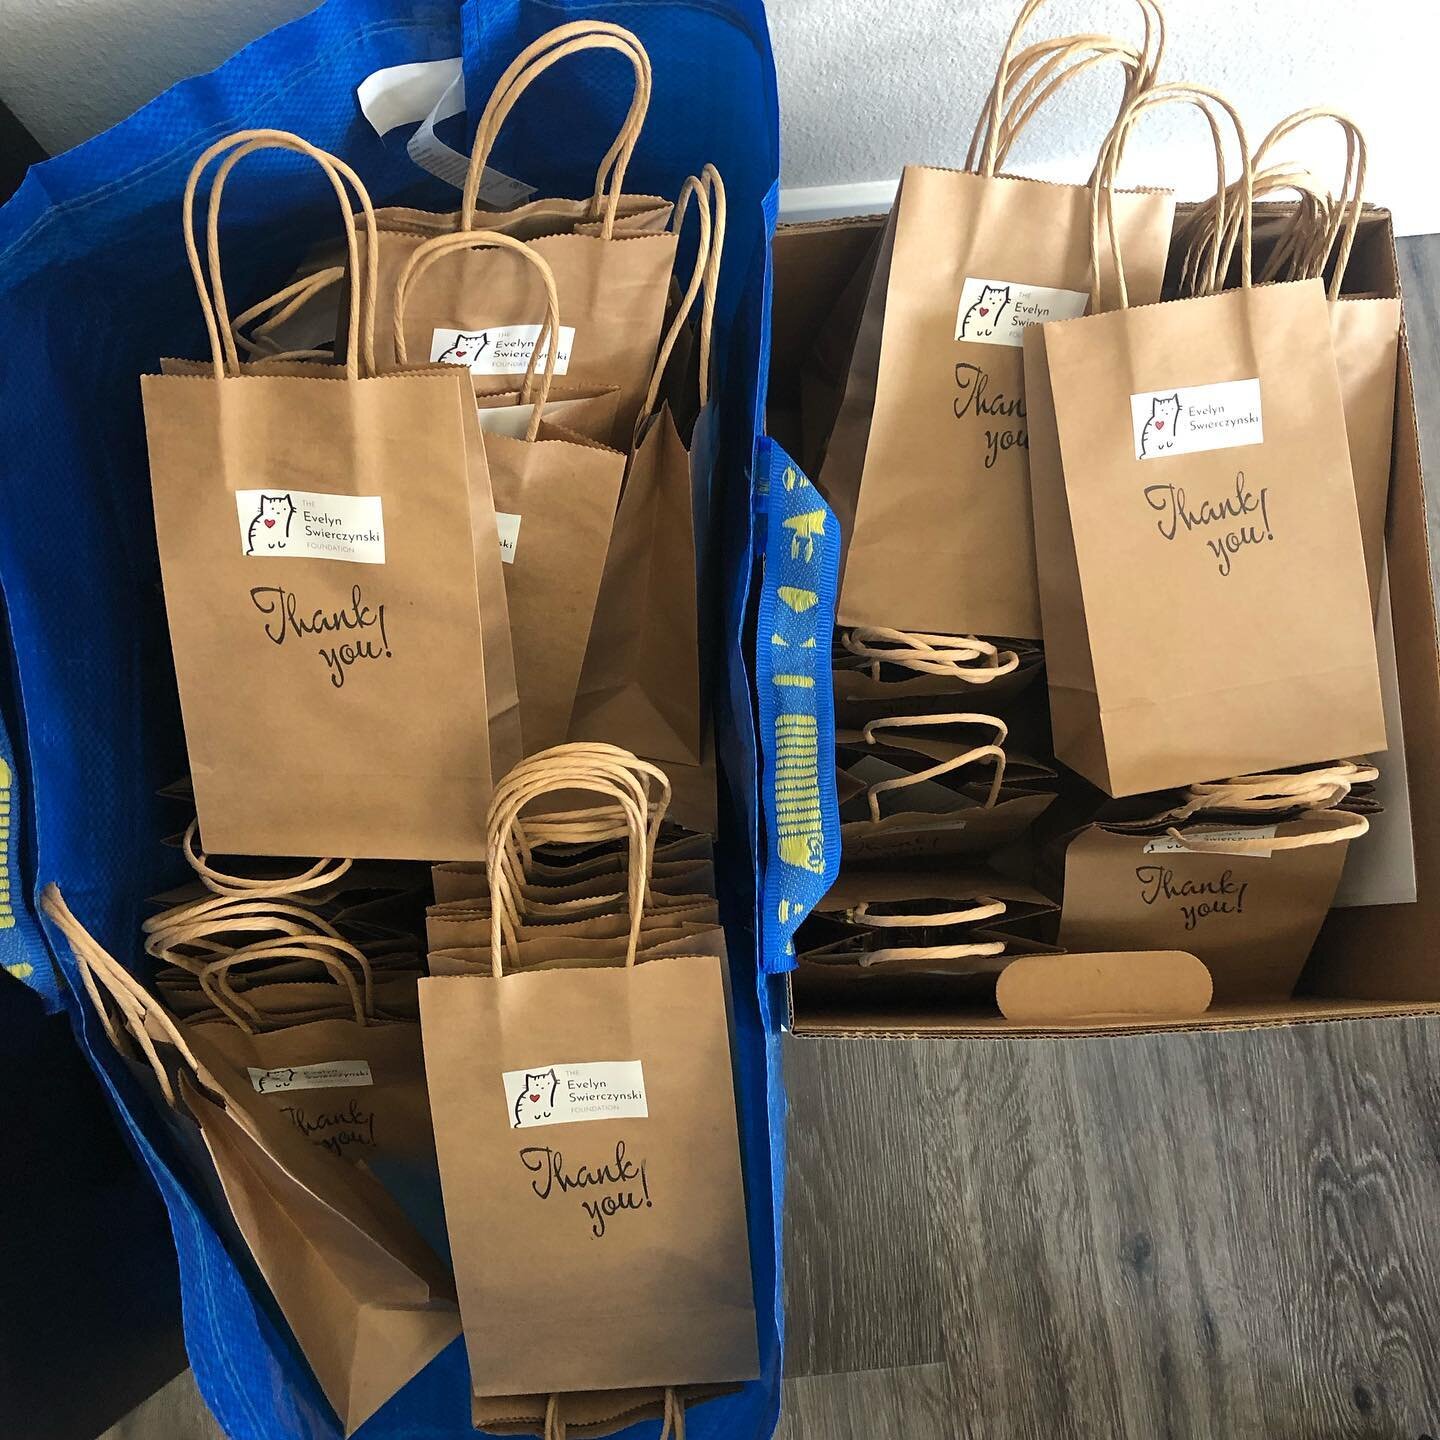 Thank you bags ready to go for all the folks signed up for our #TeamEvie Birthday Blood Drive benefiting CHLA on Tuesday July 13th at Vroman&rsquo;s Bookstore in Pasadena 

There are still a few spots available for walk ups, give CHLA a call tomorrow